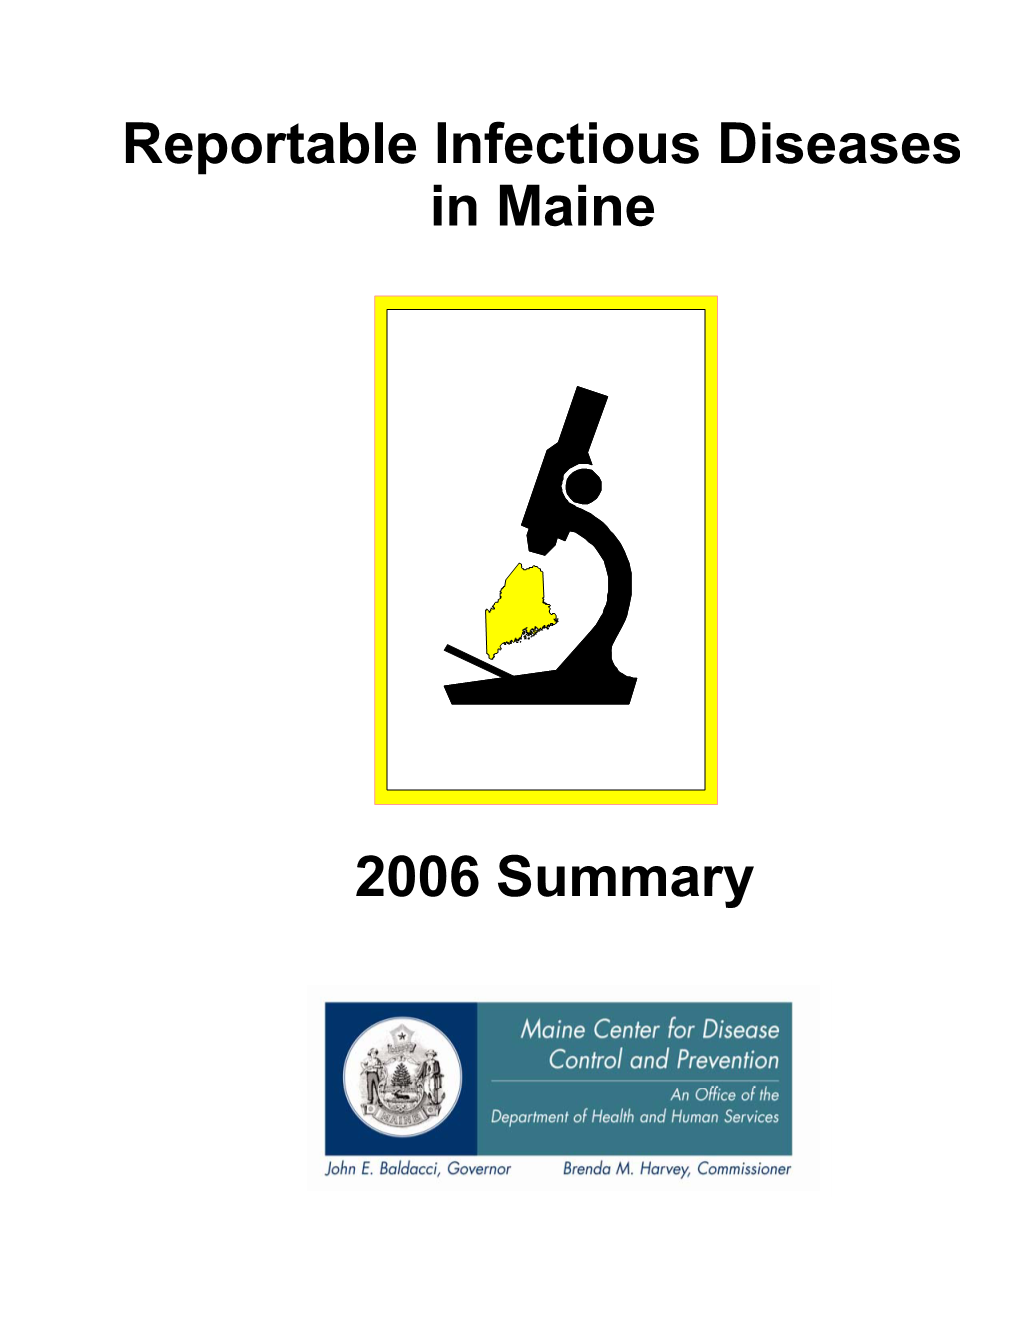 Reportable Infectious Diseases in Maine